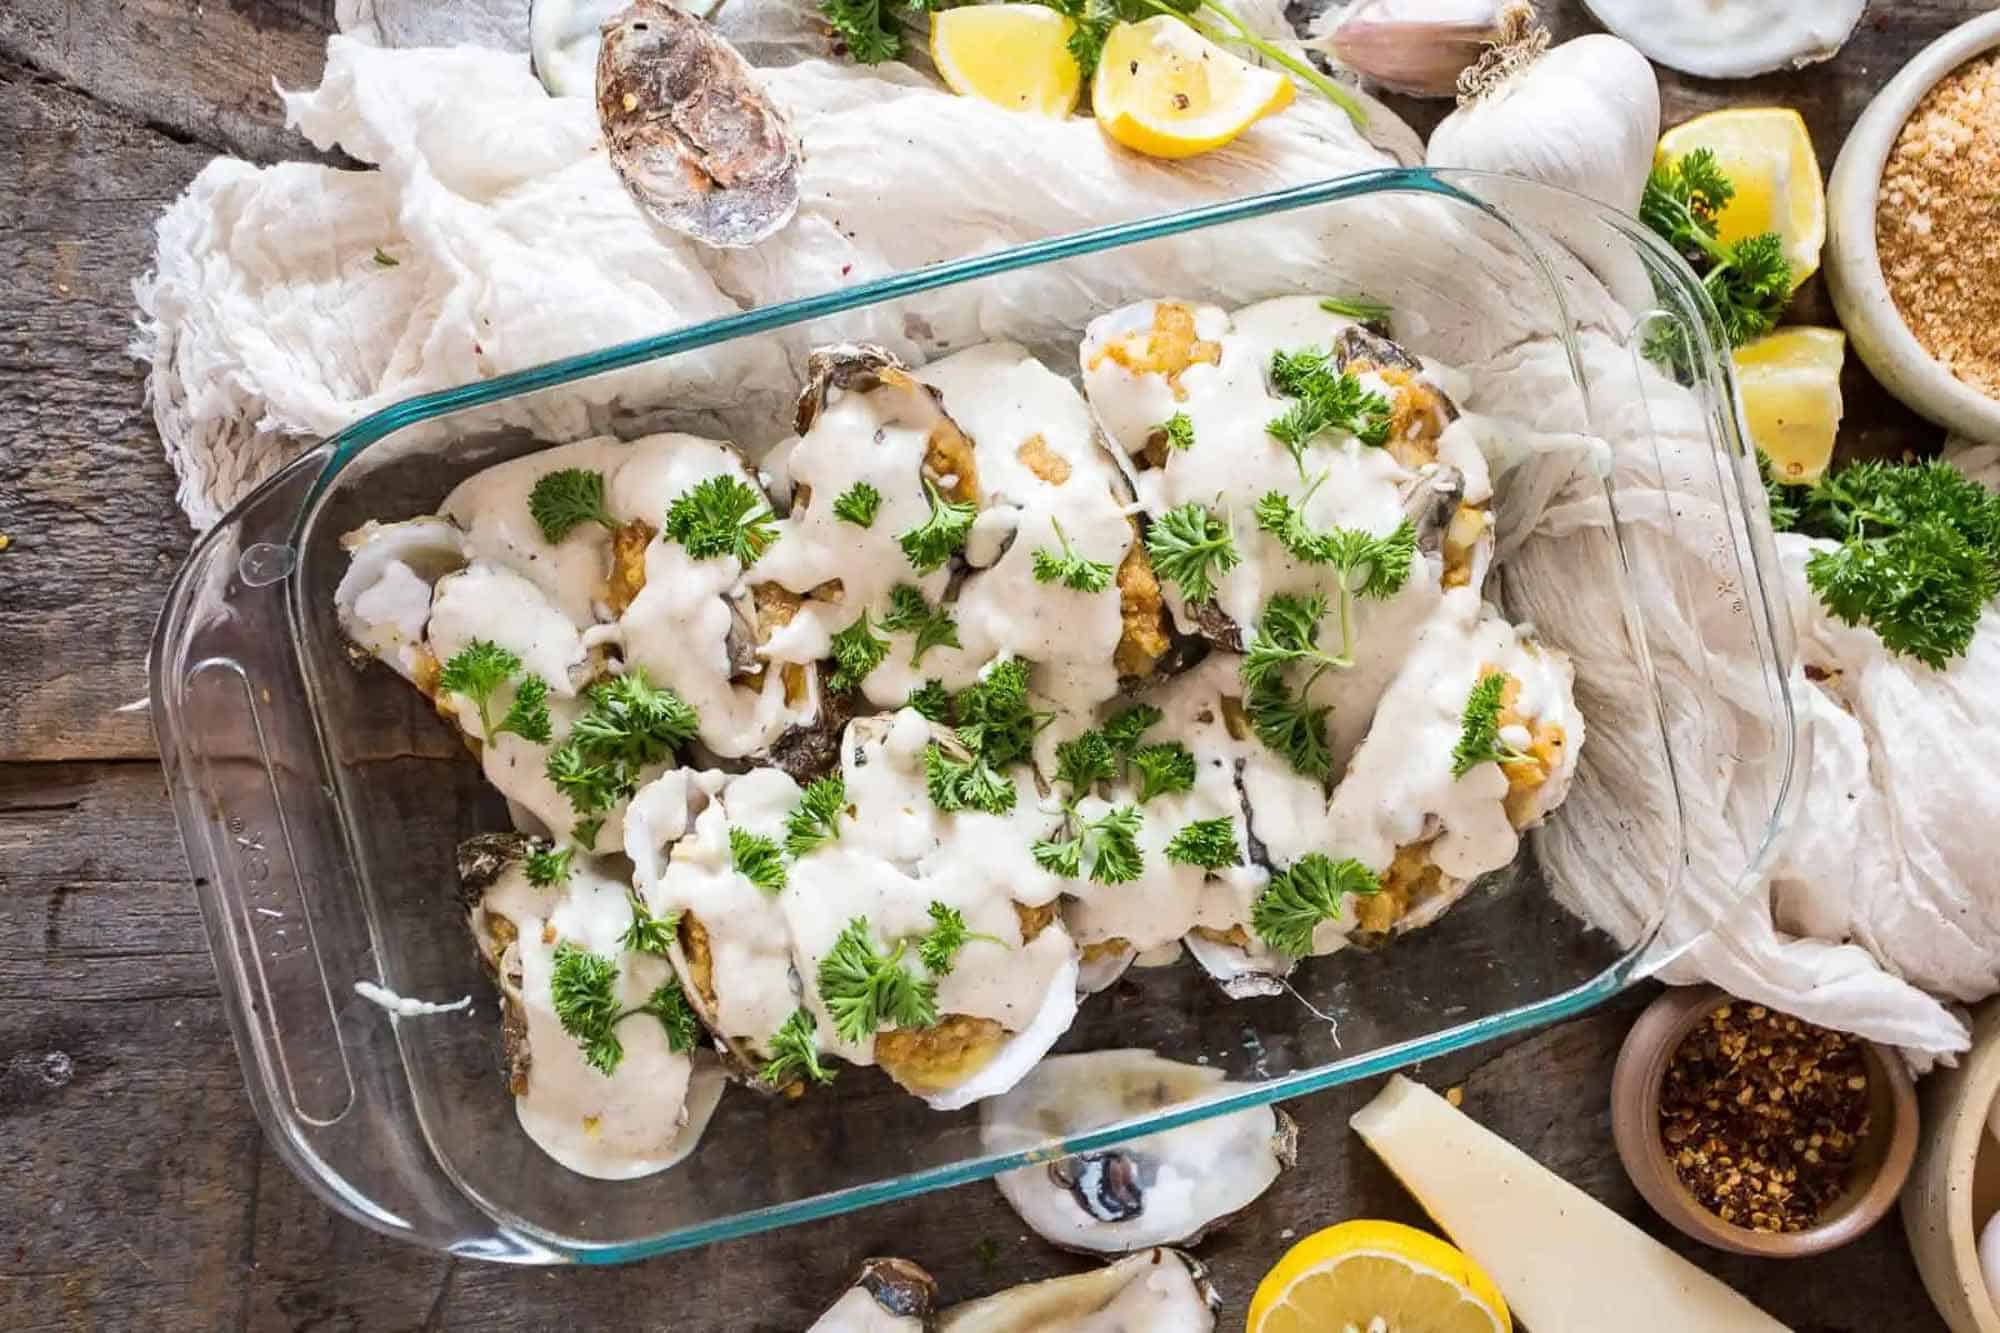 Oyster bake casserole on table with linen and herbs.